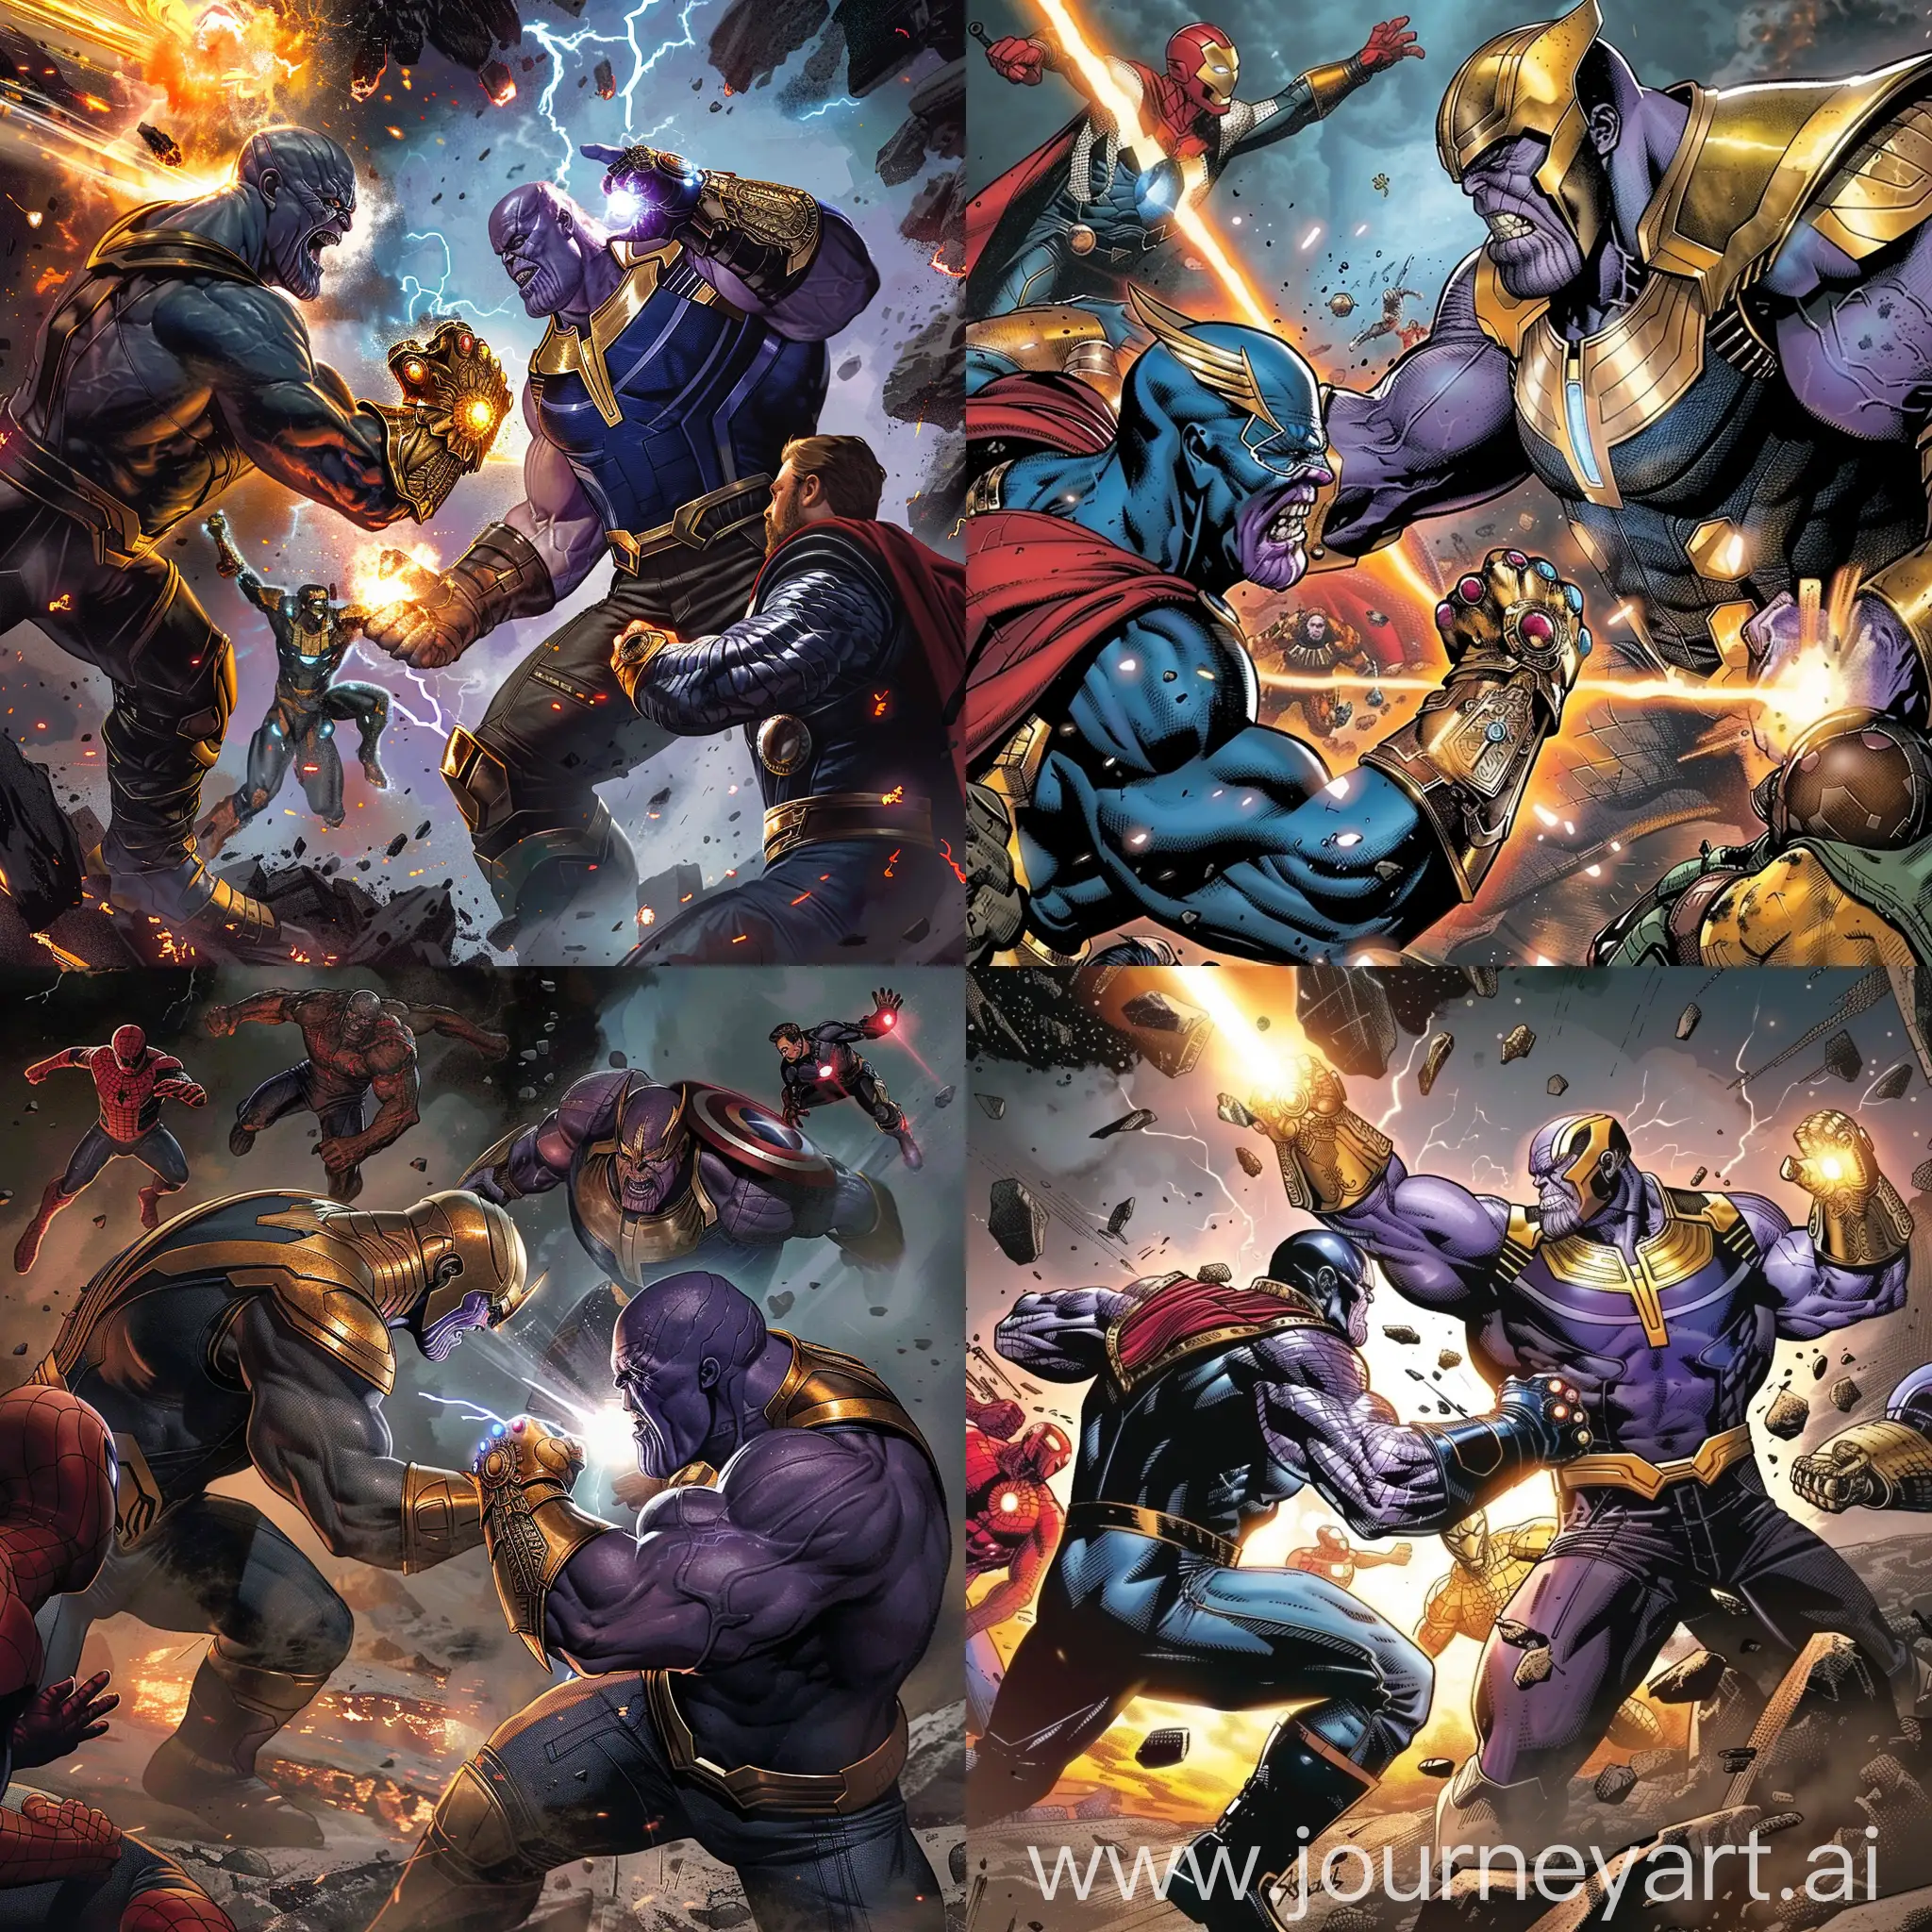 Epic-Battle-Thanos-Confronts-Marvel-Heroes-in-Intense-Showdown